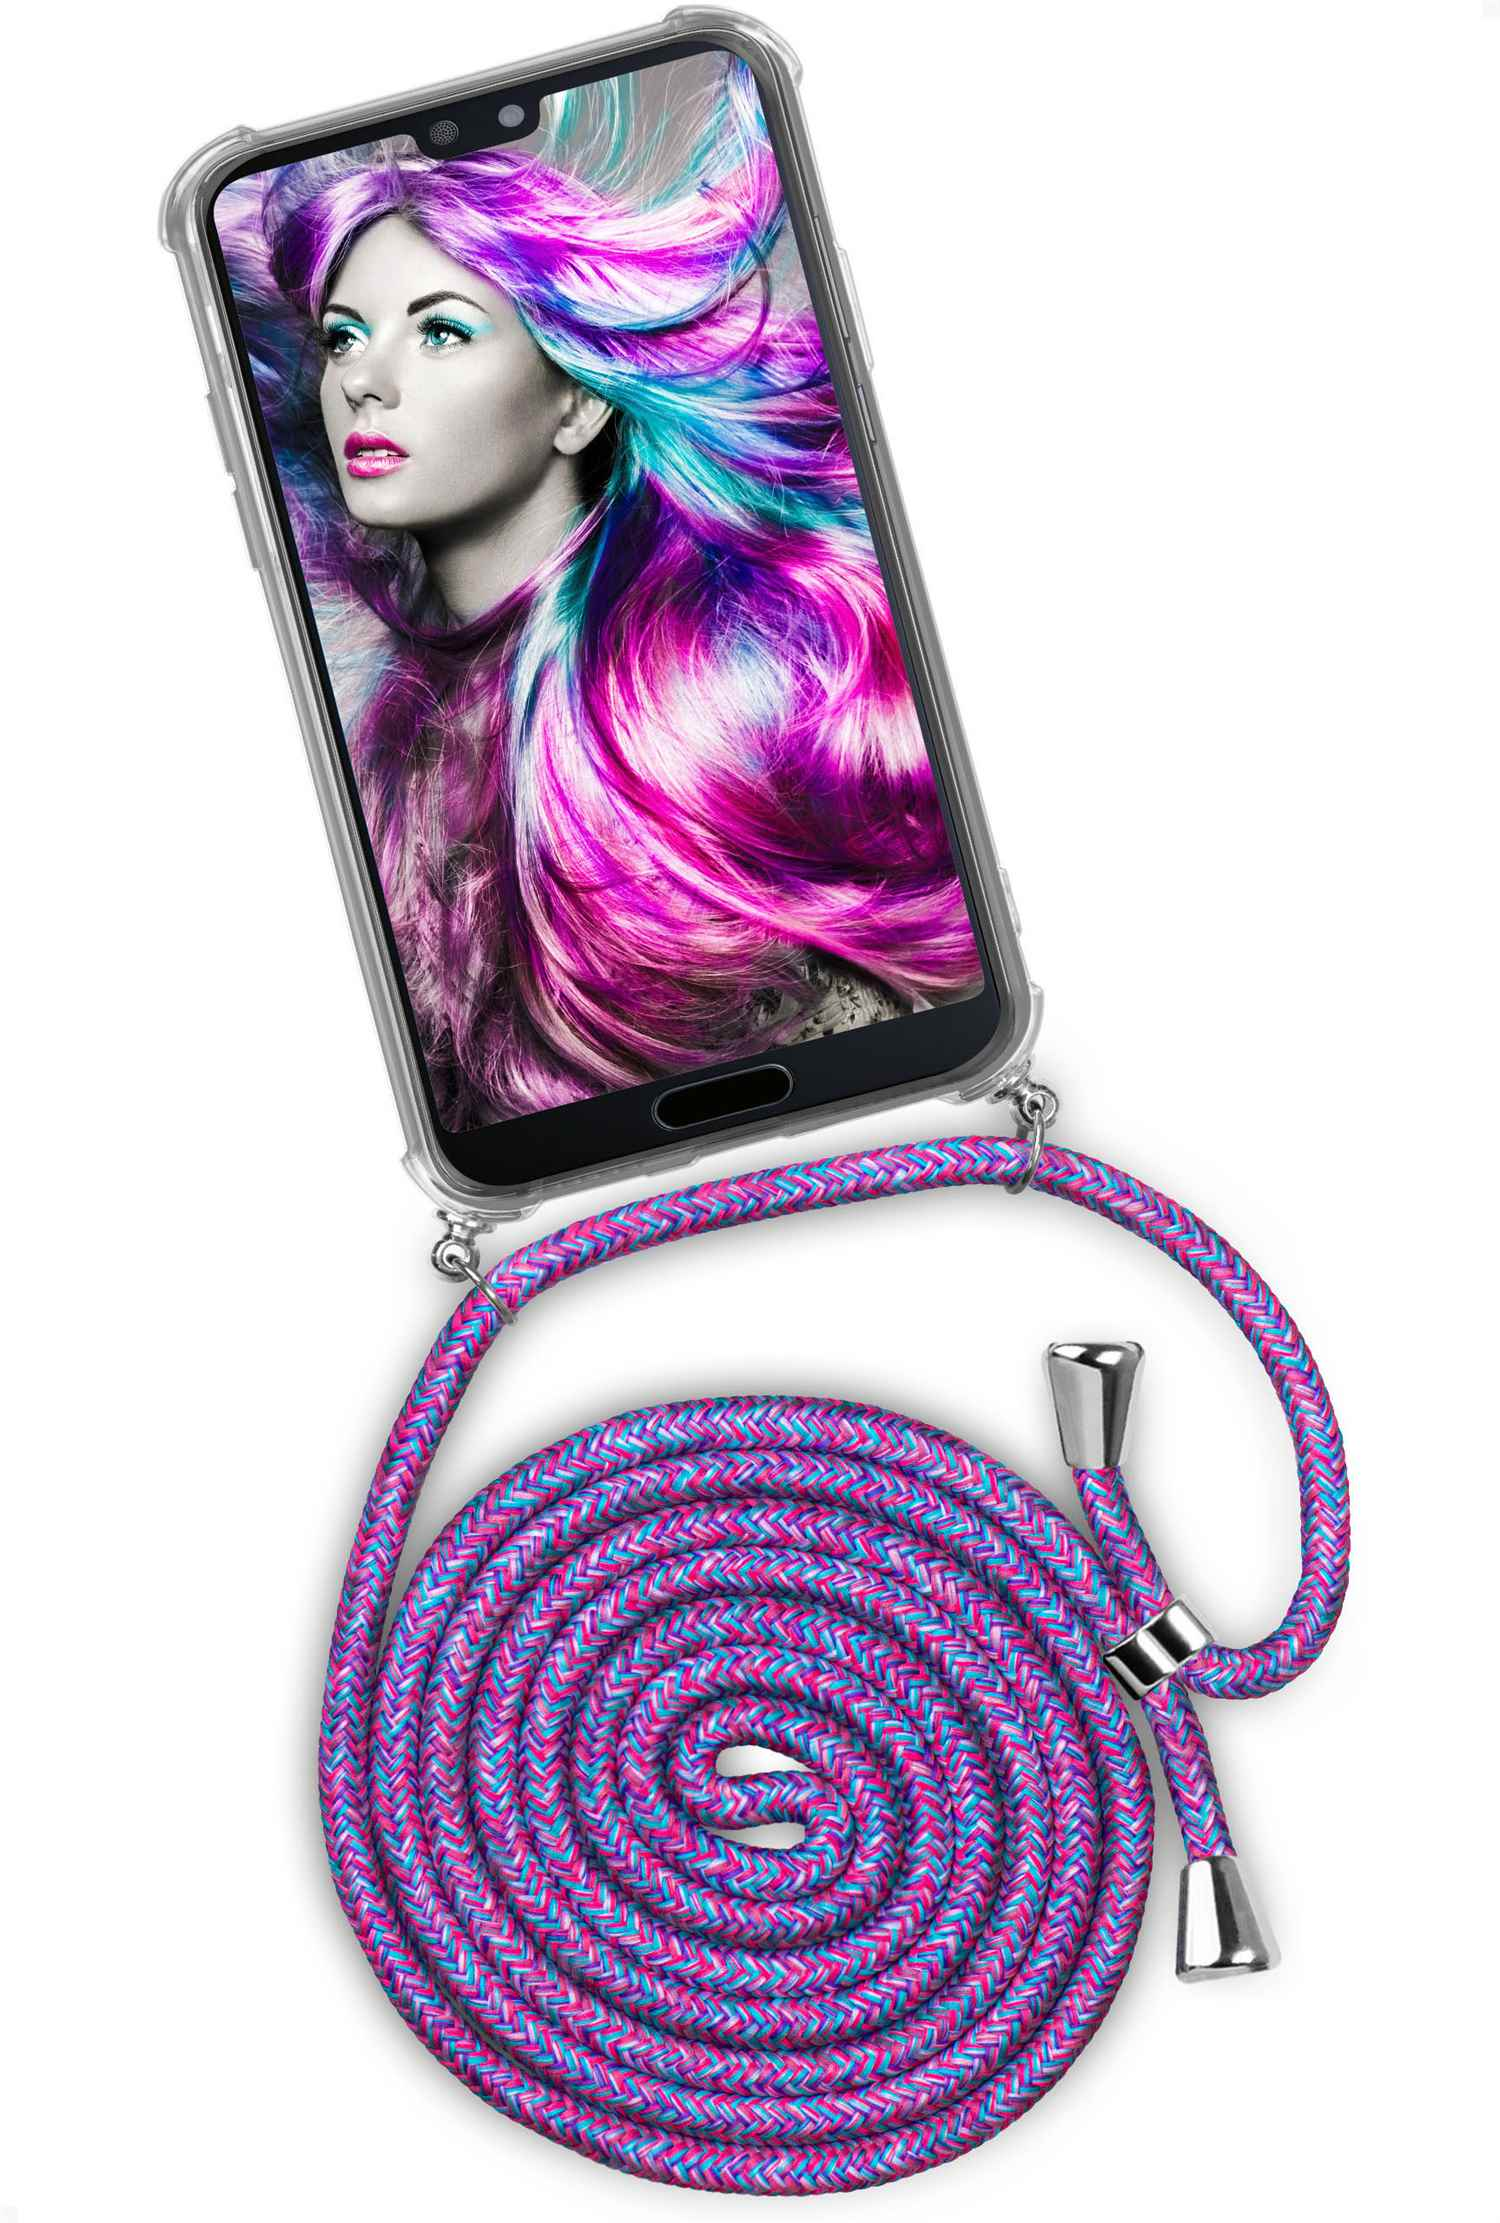 ONEFLOW Twist Case, Unicorn Backcover, Crazy Huawei, (Silber) P20 Pro